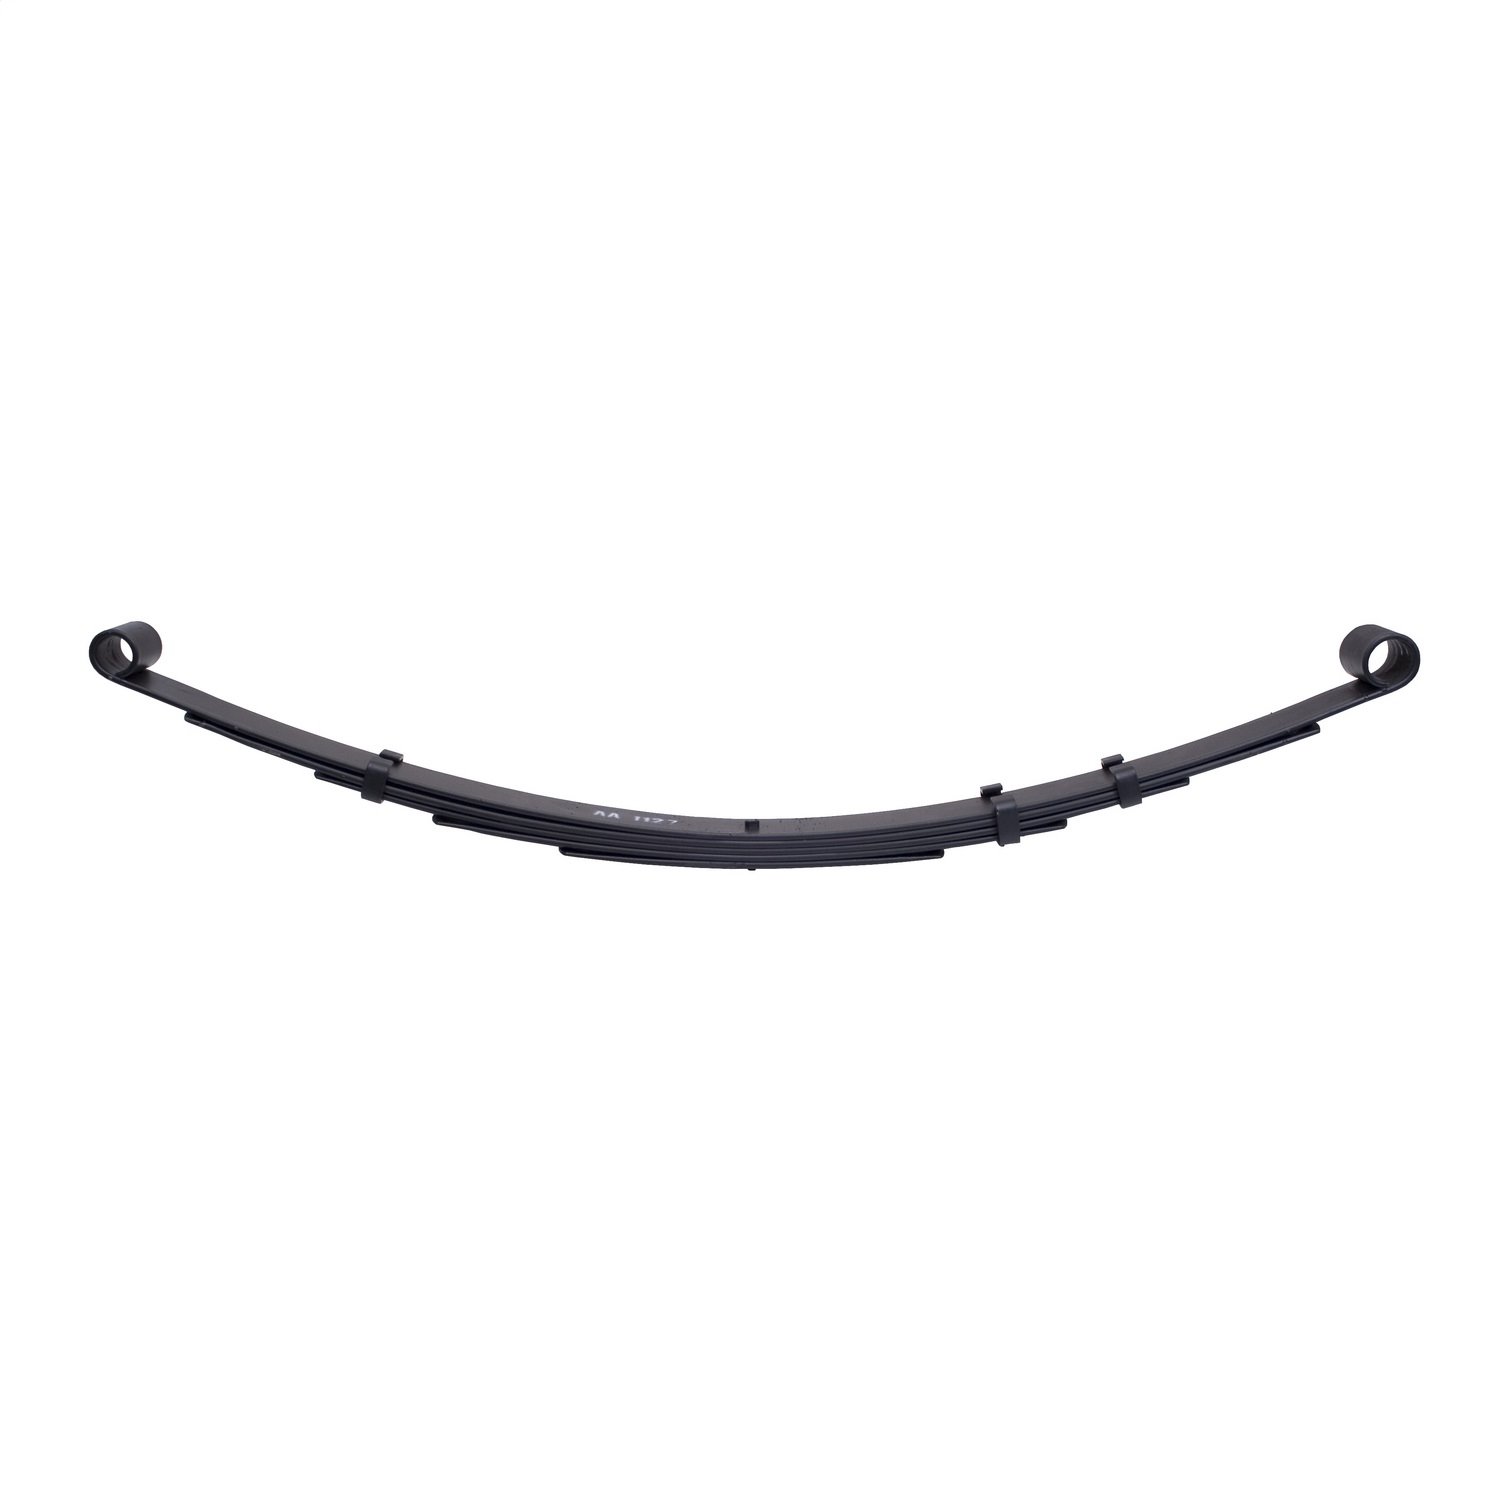 Stock replacement 5 leaf rear spring from Omix-ADA, Fits 87-95 Jeep Wrangler YJLeft or right side.